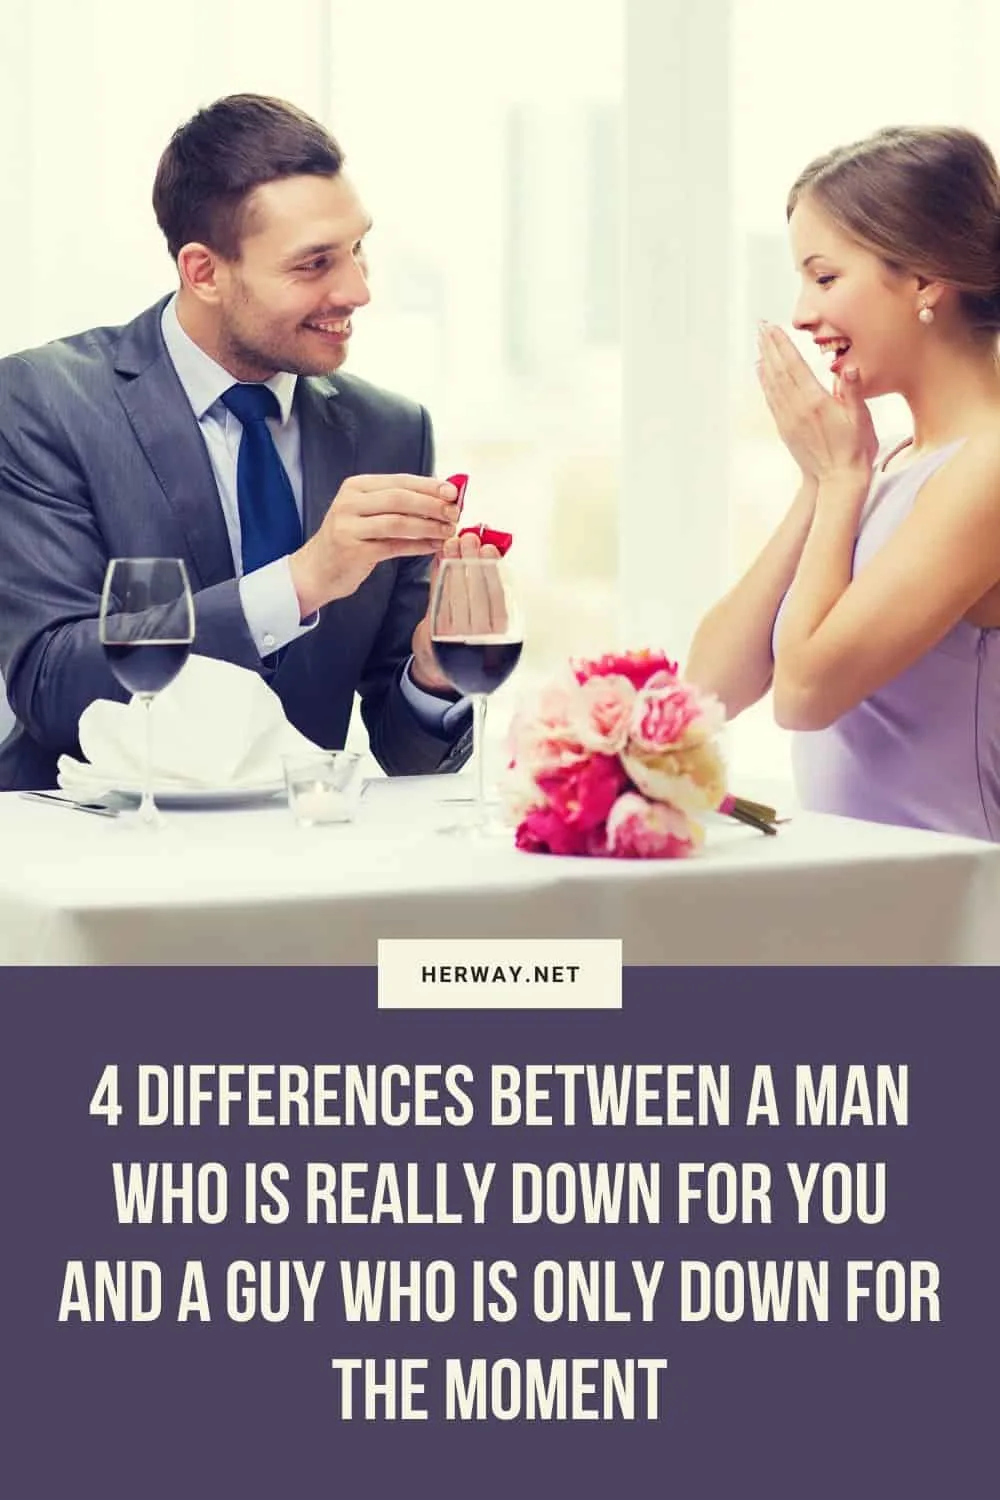 4 Differences Between A Man Who Is Really Down For You And A Guy Who Is Only Down For The Moment